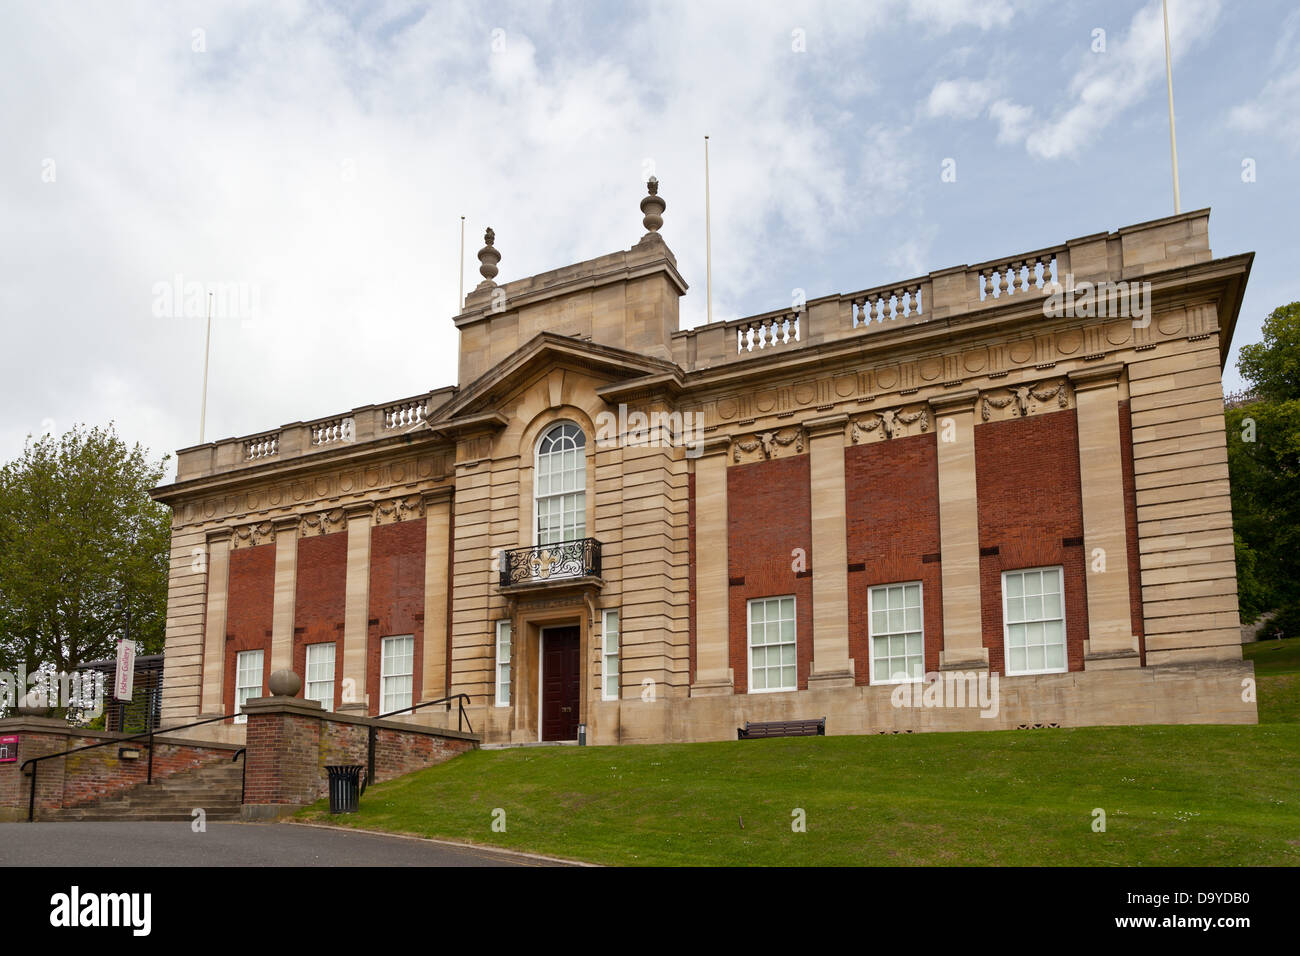 Lincoln - Usher gallery museum; Lincoln, Lincolnshire, UK, Europe Stock Photo